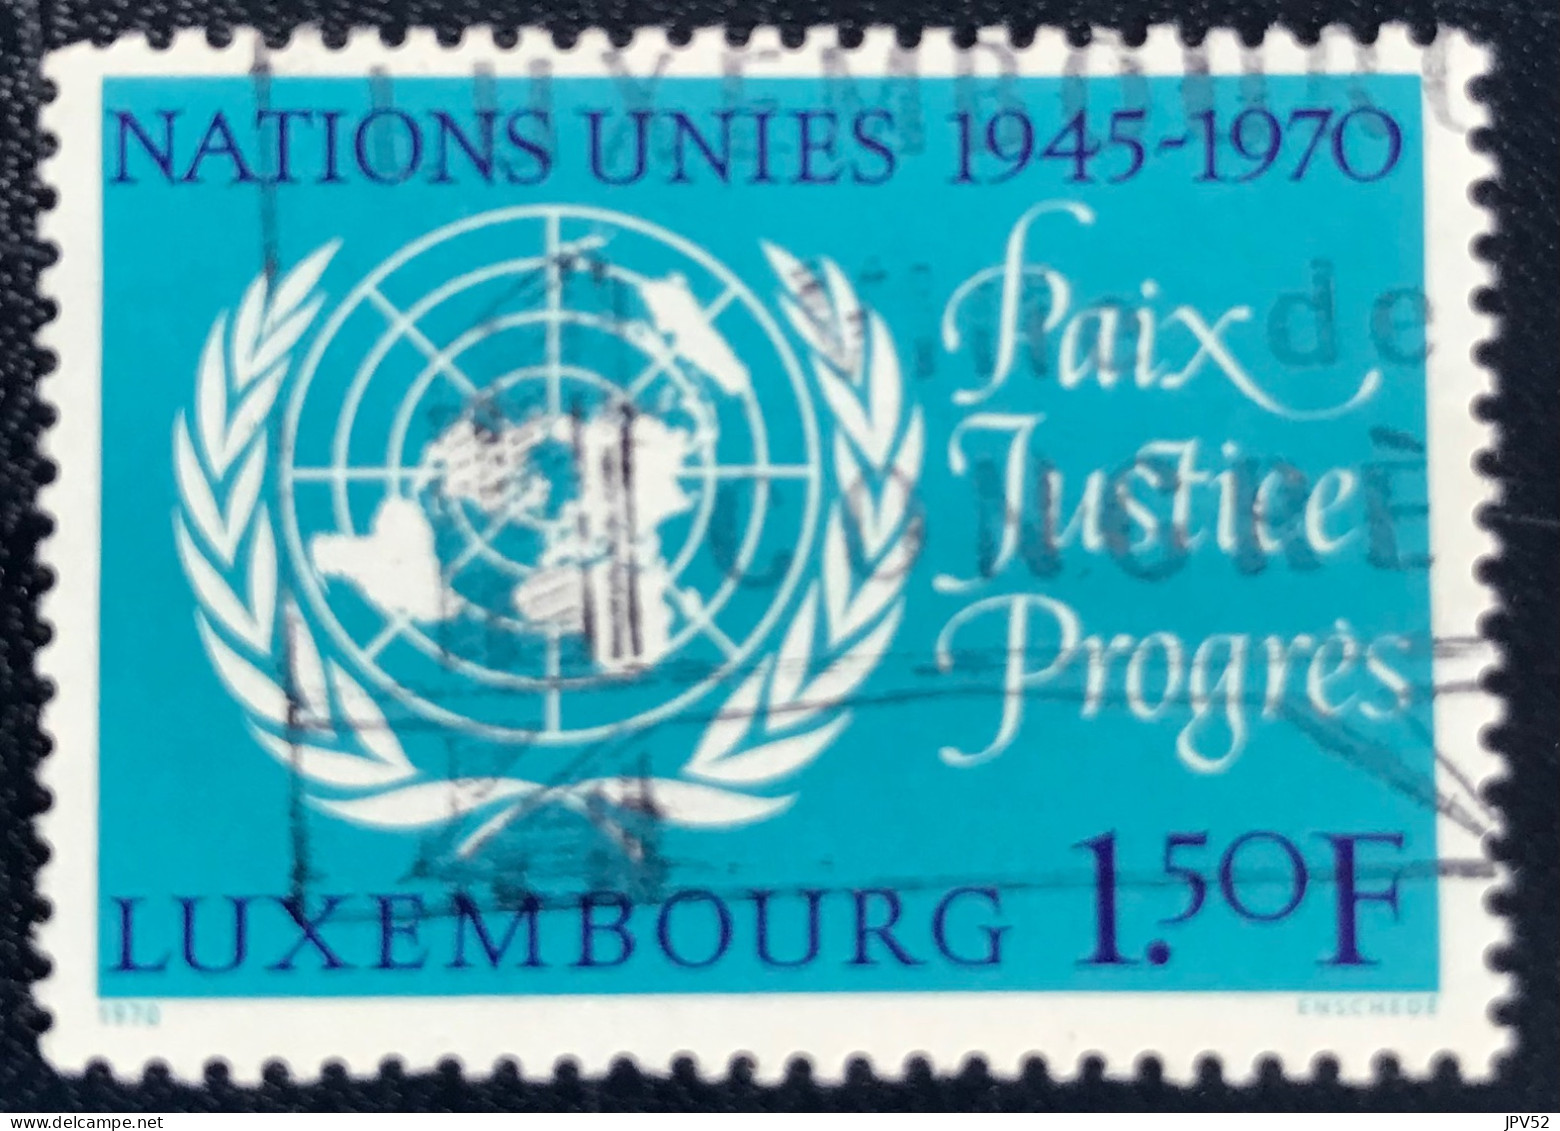 Luxembourg - Luxemburg - C18/32 - 1970 - (°)used - Michel 813 - Embleem VN - Usados